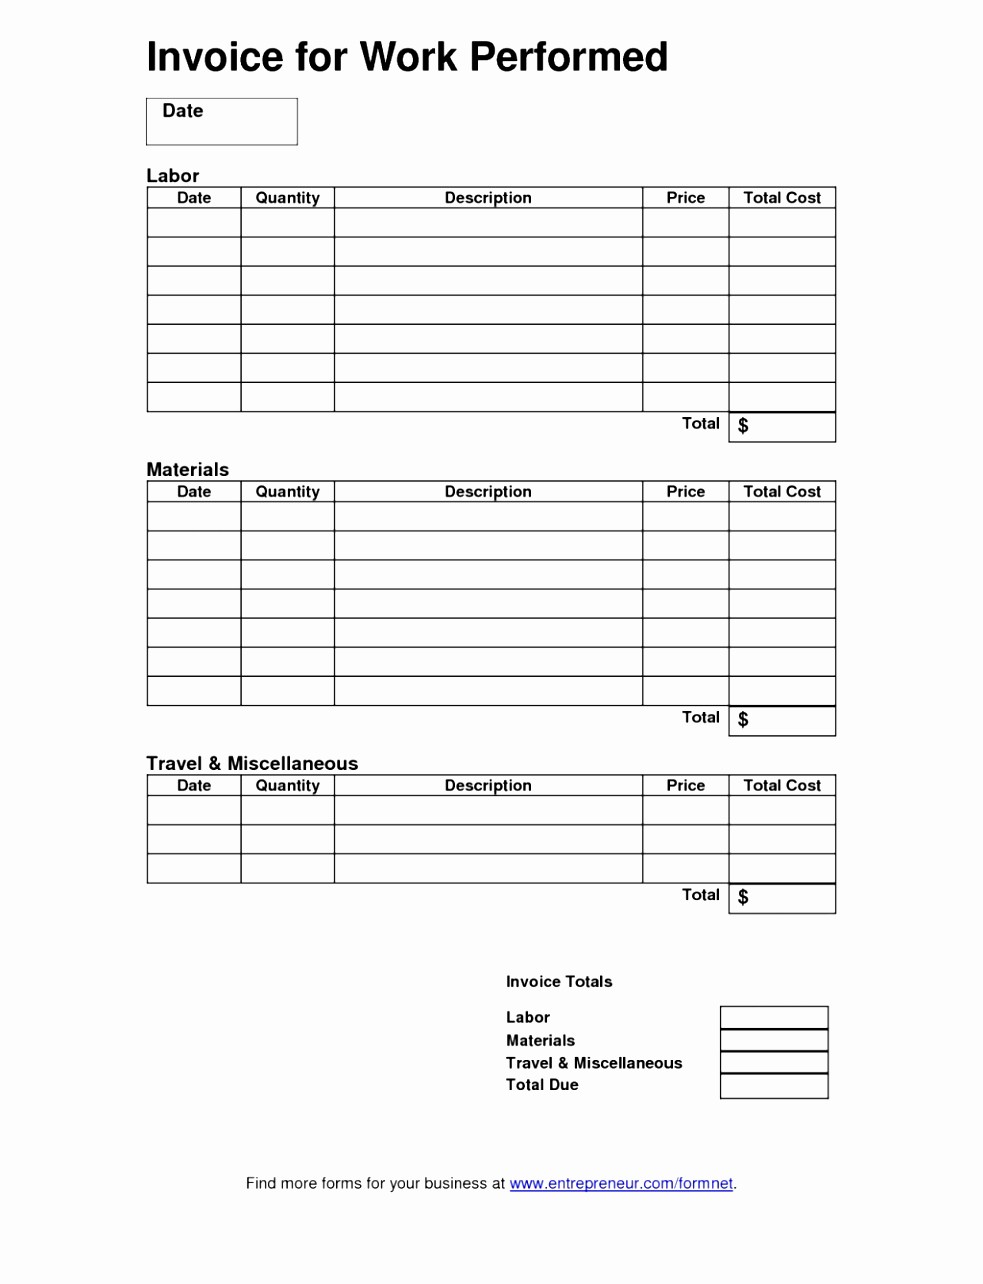 Invoice for Work Done Template Fresh 6 Invoice Template for Work Done Eunuu